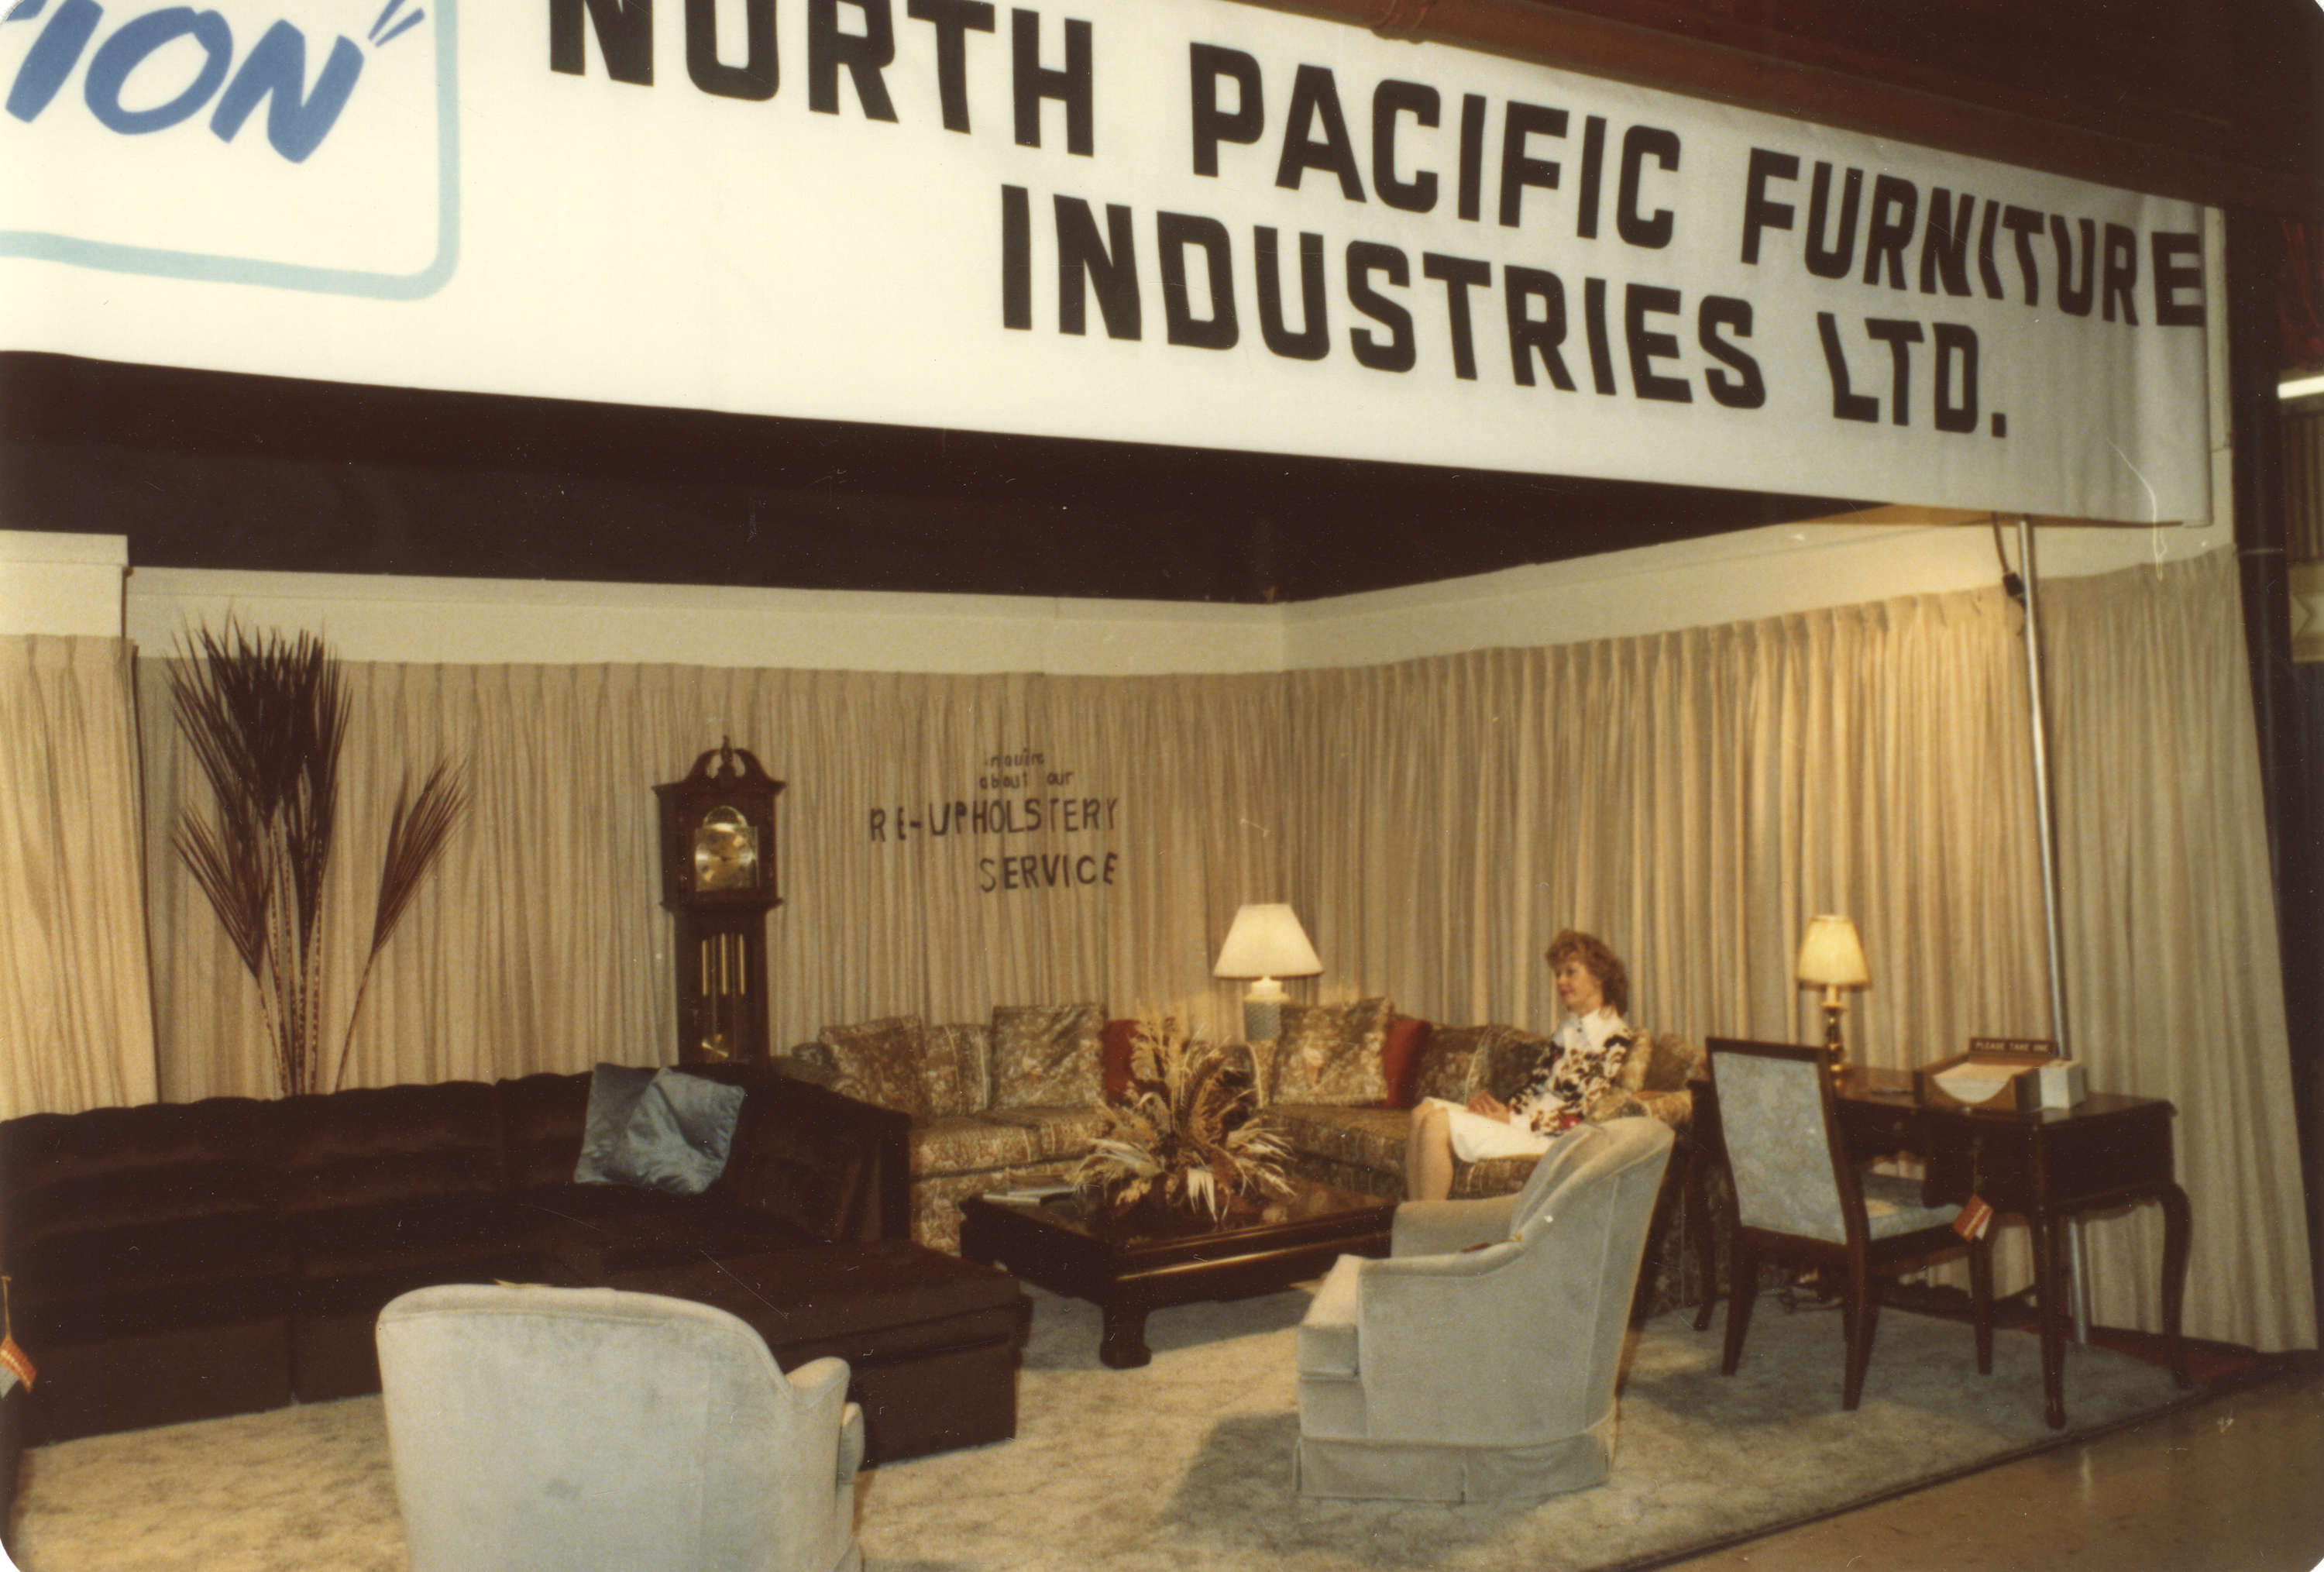 North Pacific Furniture Industries Ltd Display Booth City Of